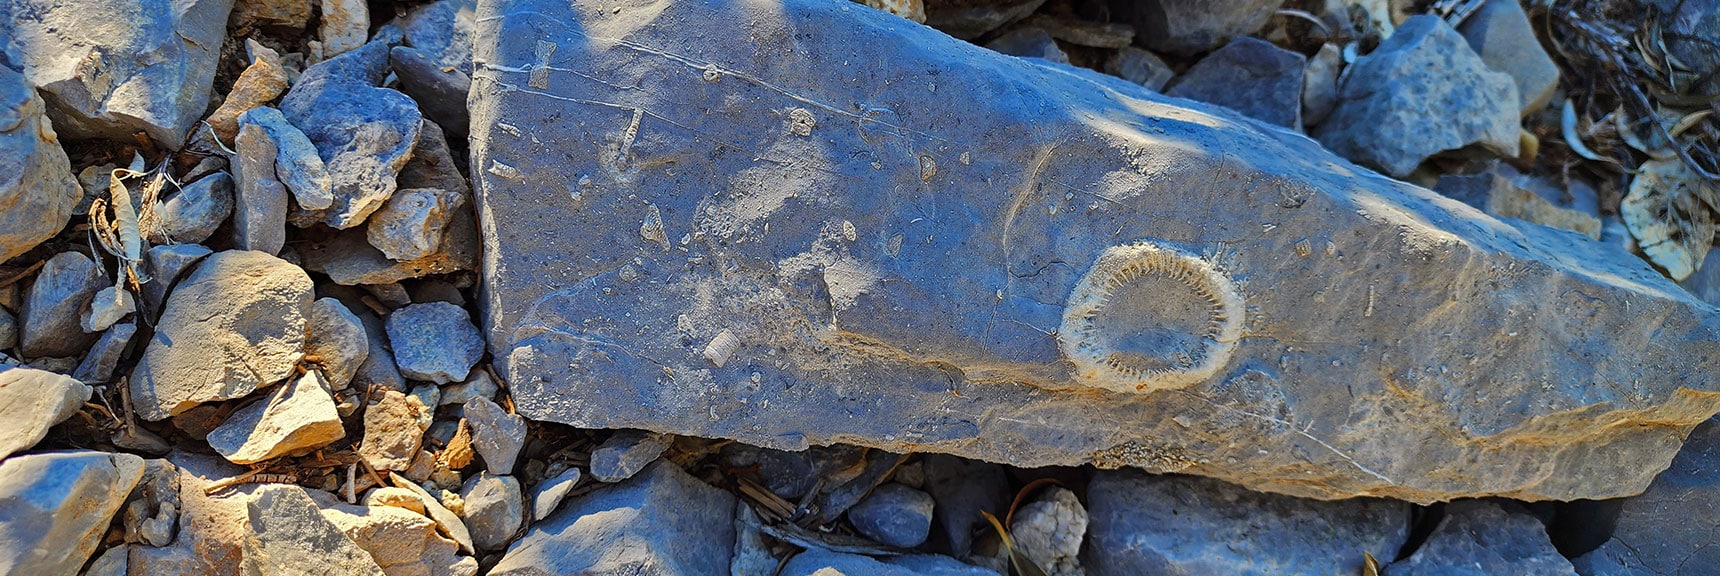 450-Million-Year-Old Sea Anemone Fossil Embedded in the Limestone? Look for Smaller Fossils Too! | Red Rock Summit | Lovell Canyon & Rainbow Mountain Wilderness, Nevada